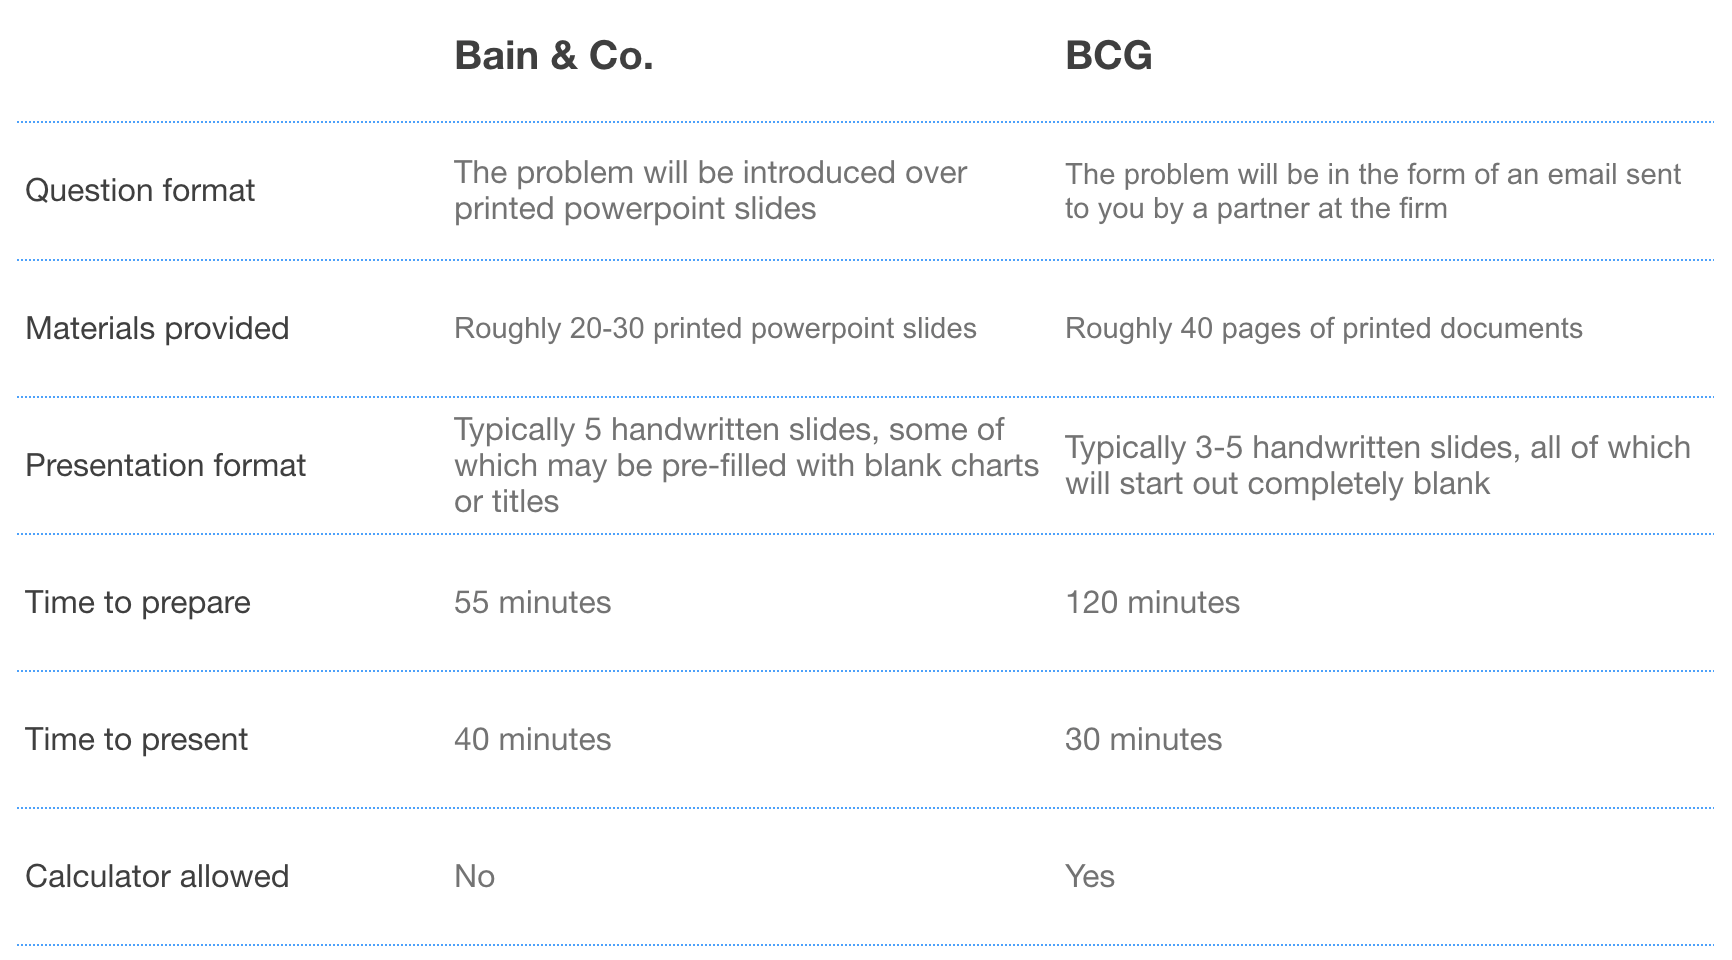 Comparison of BCG and Bain written case interview formats